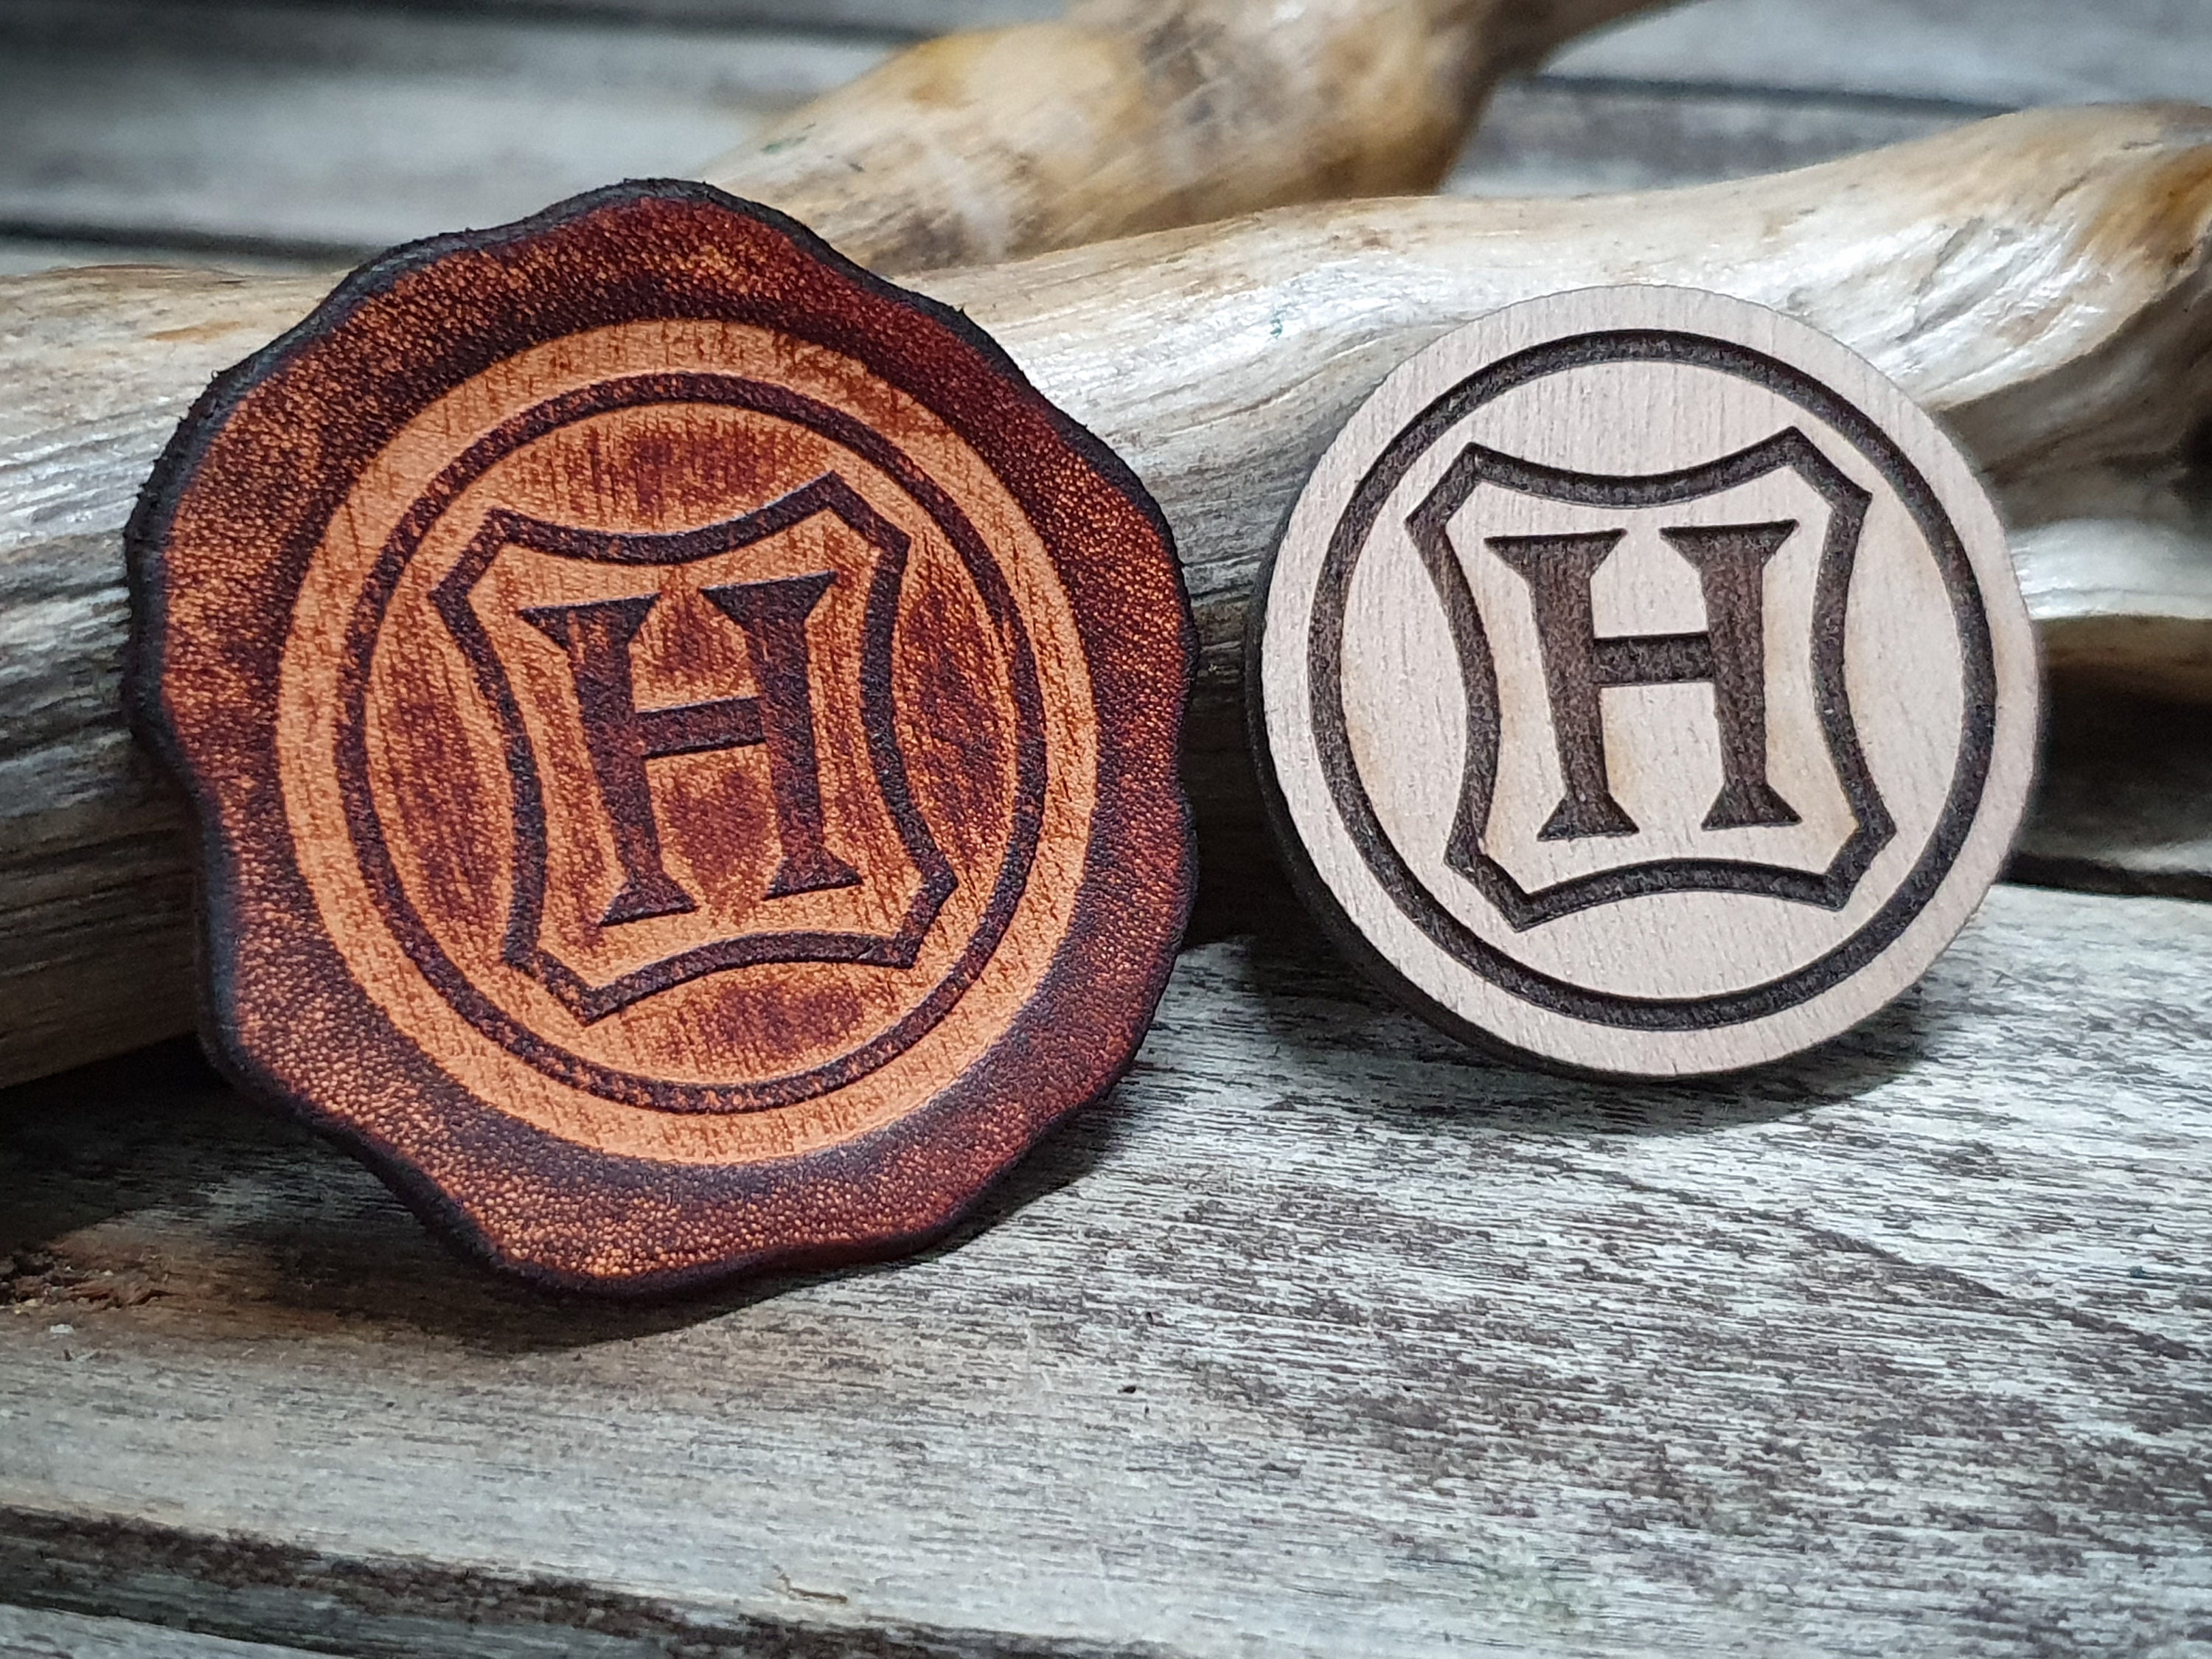 Wood Burning Pen Uppercase Letters Attachments Letter Hotstamps, Branding Stamps  Woodburning, Pyrography, Leather Craft Woodburner -  Norway